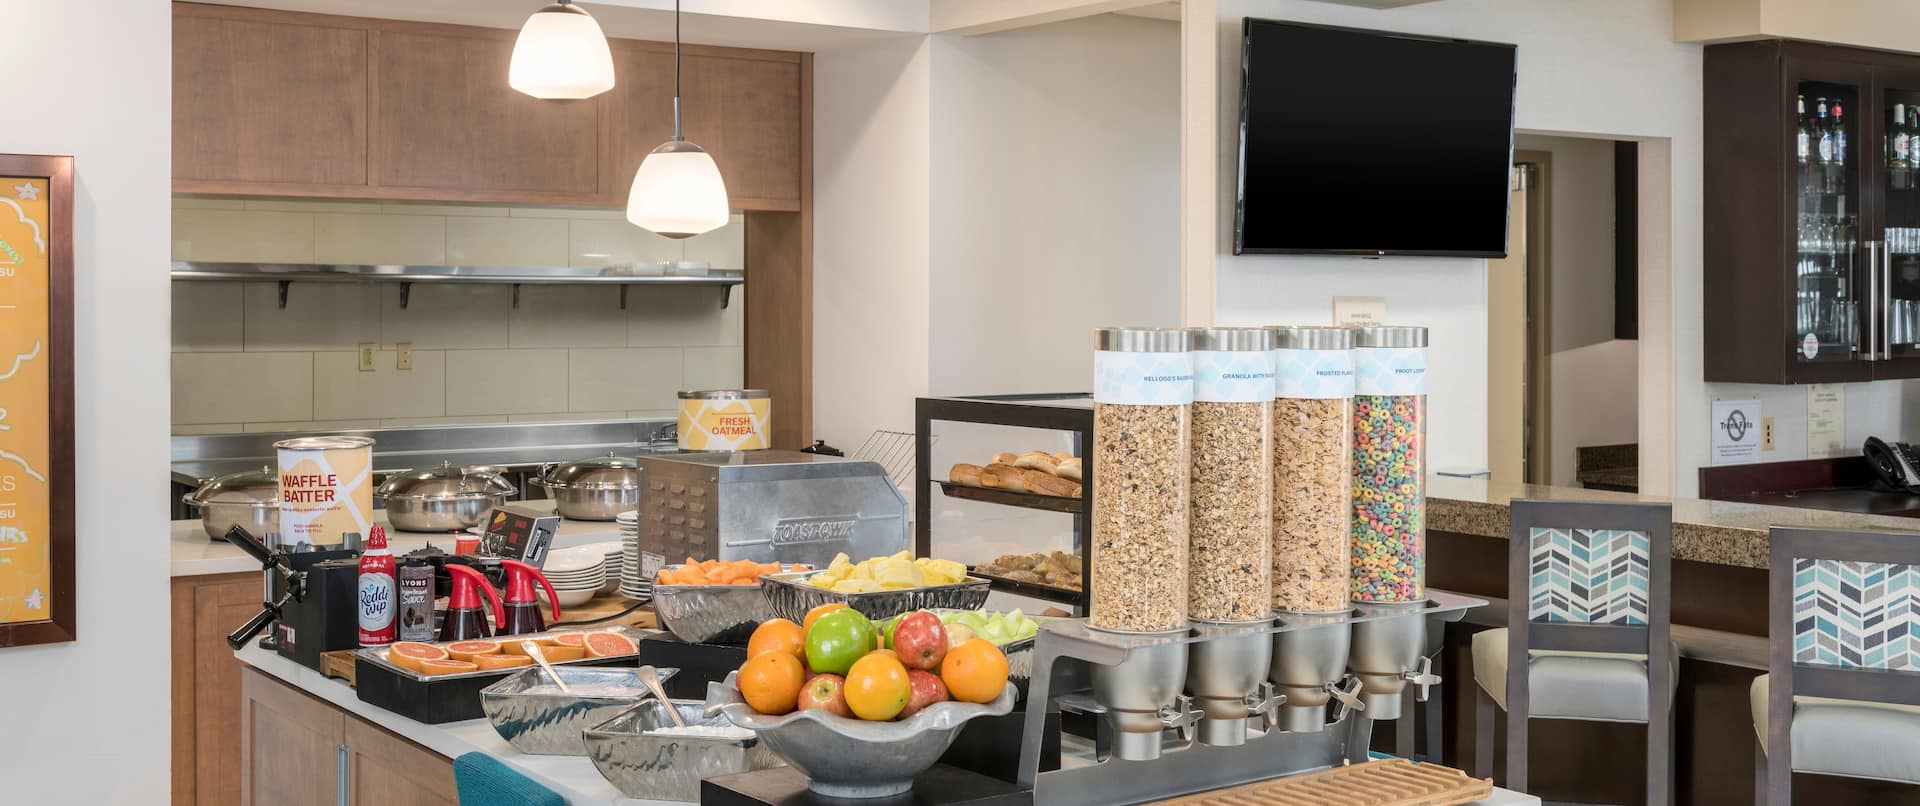 Breakfast Area with Fresh Fruits Cereals and an HDTV